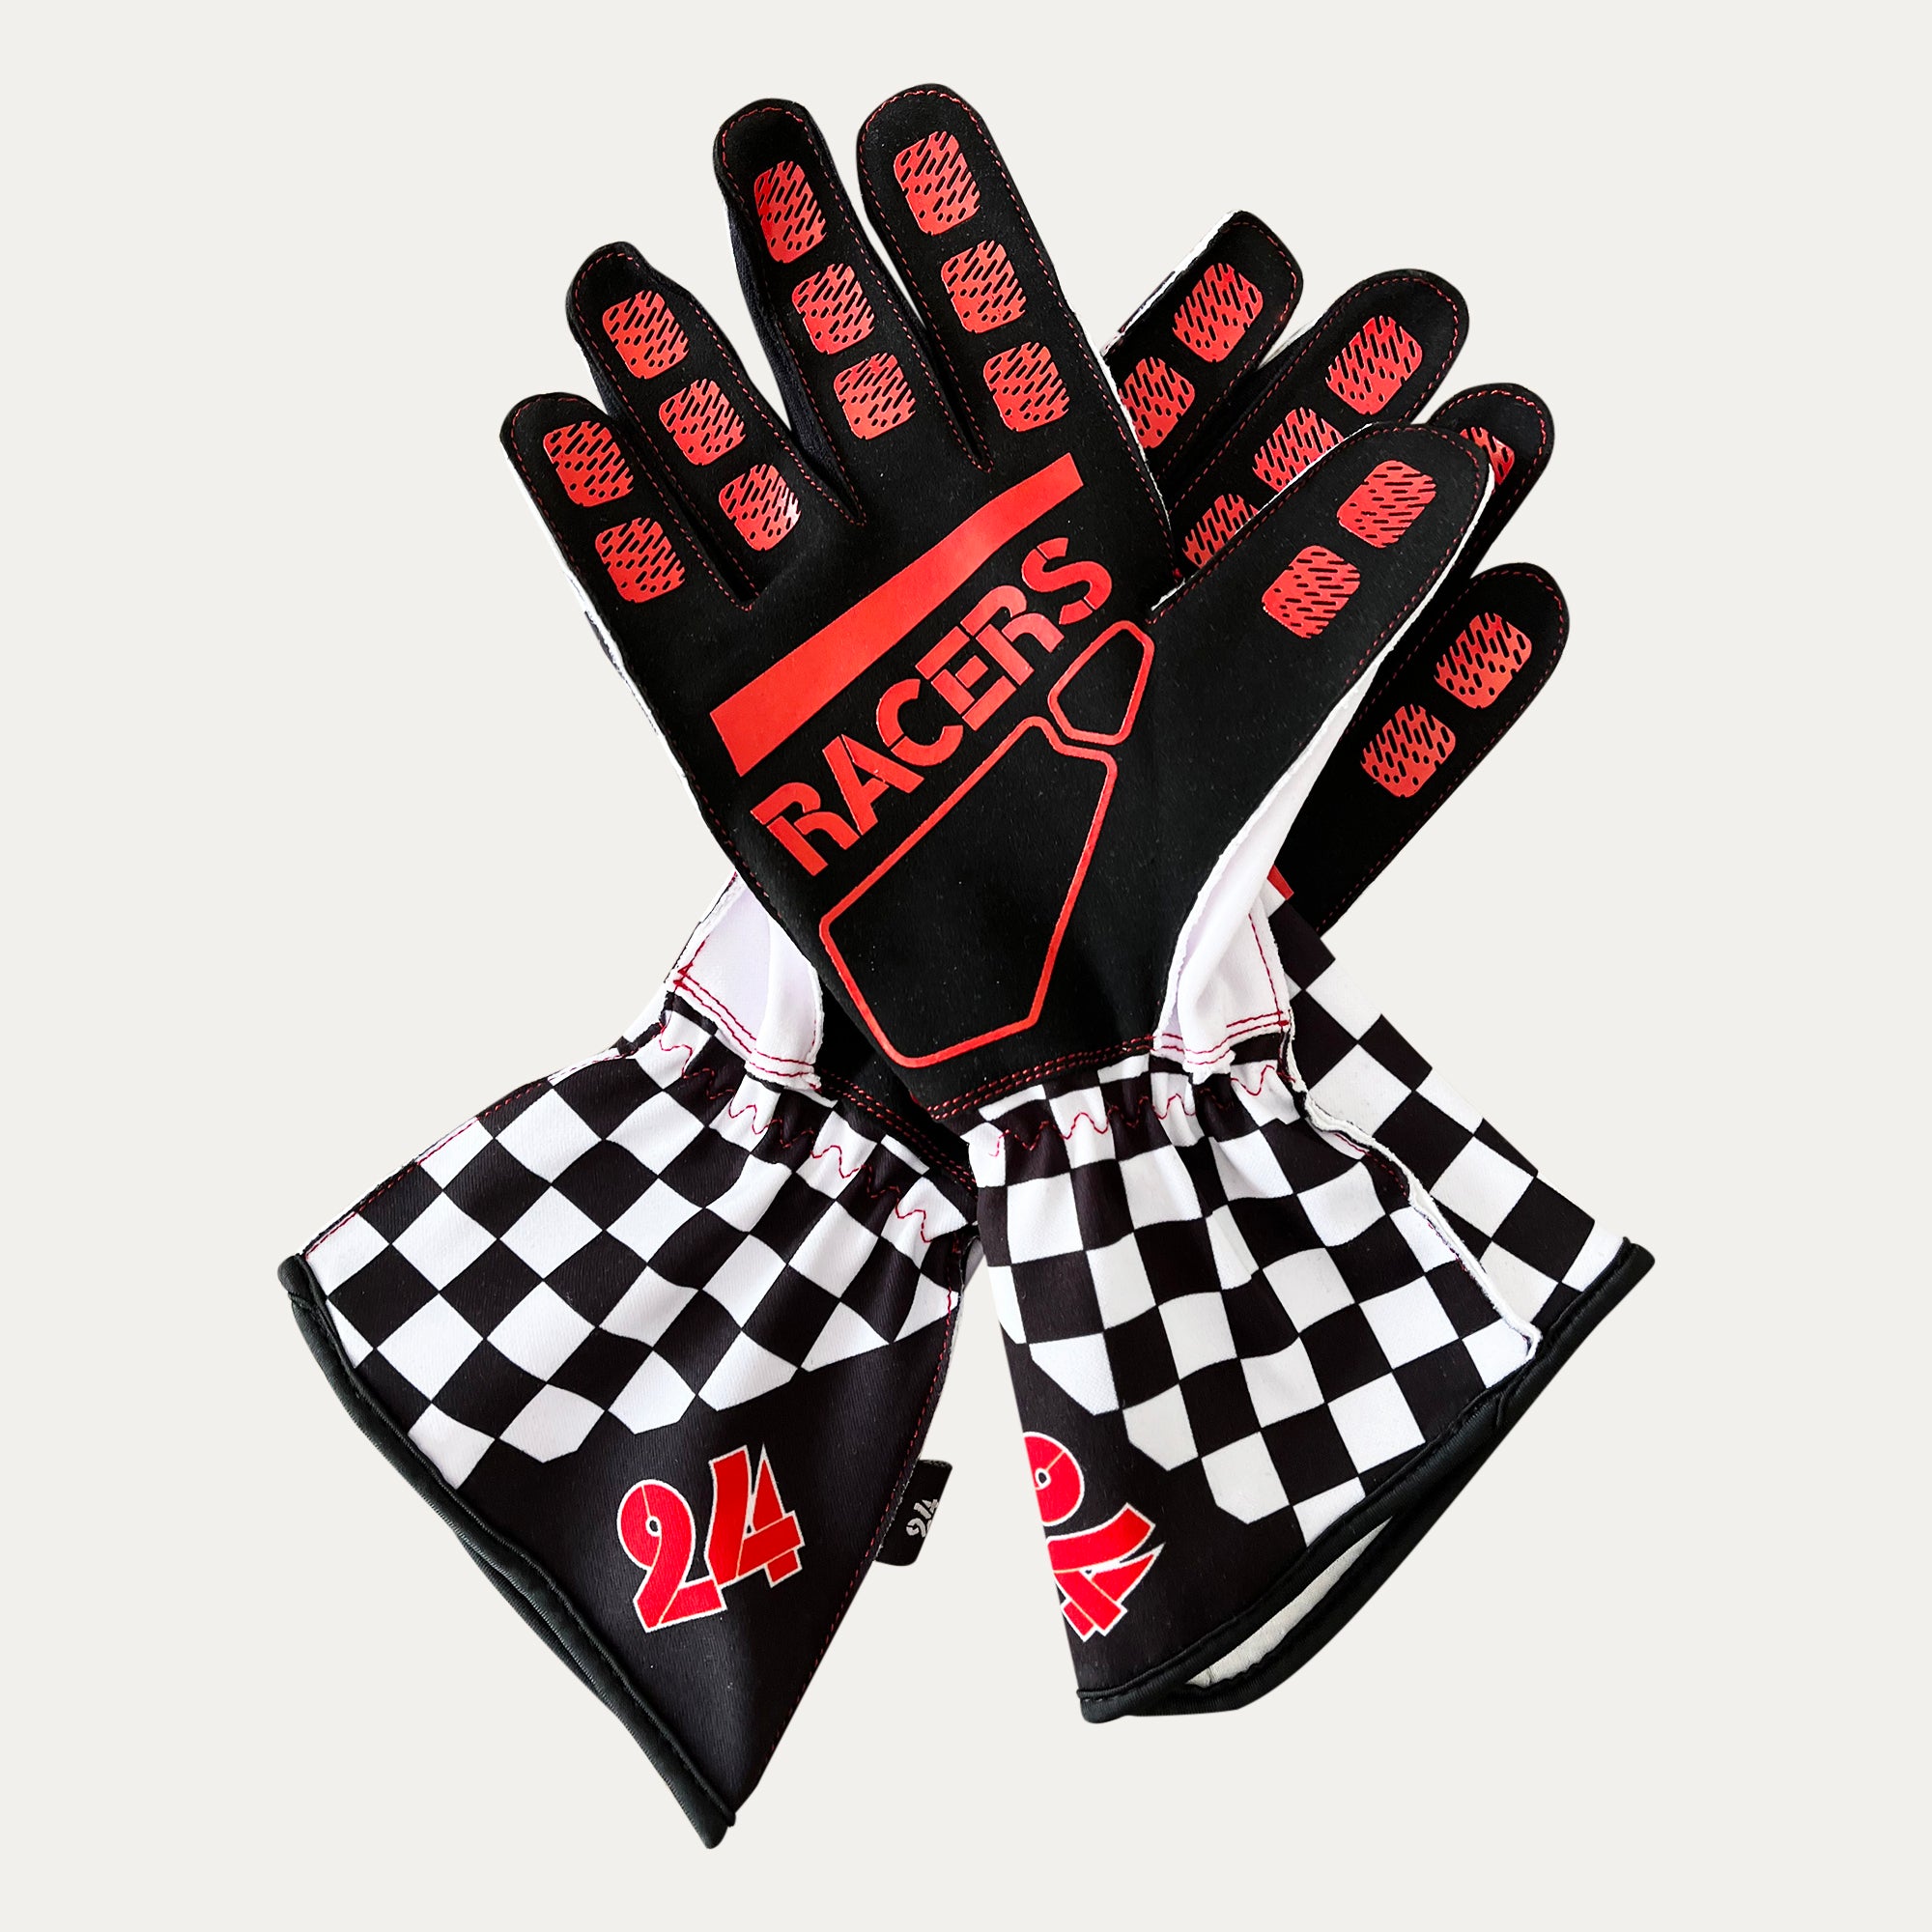 24 Racers Sim Racing Gloves - Checkered Flag